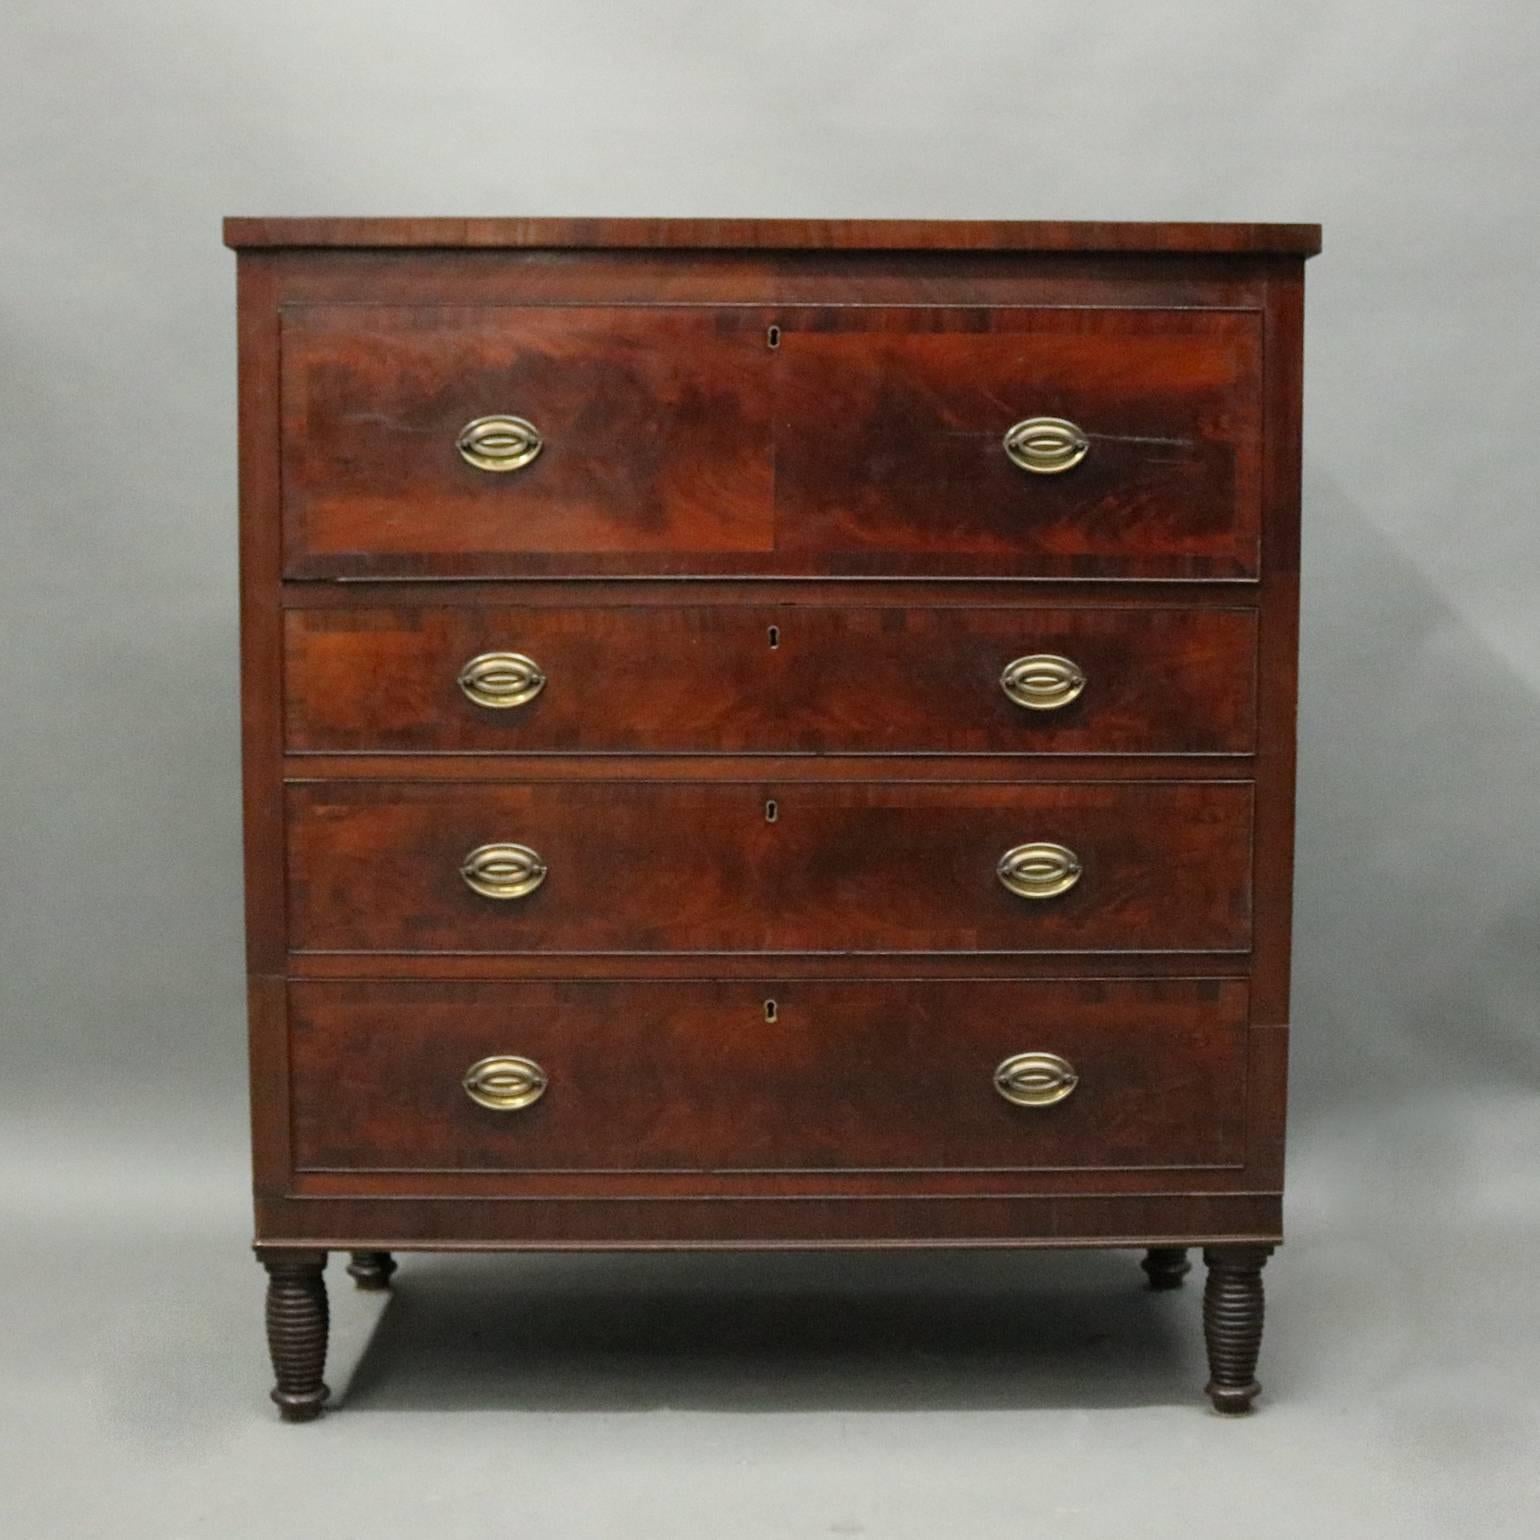 Antique Sheraton butler's desk features flame mahogany construction with cabinet of three long drawers and drop front opening to writing surface and internal compartments, bronze pulls throughout, seated on turned horizontally reeded legs, circa